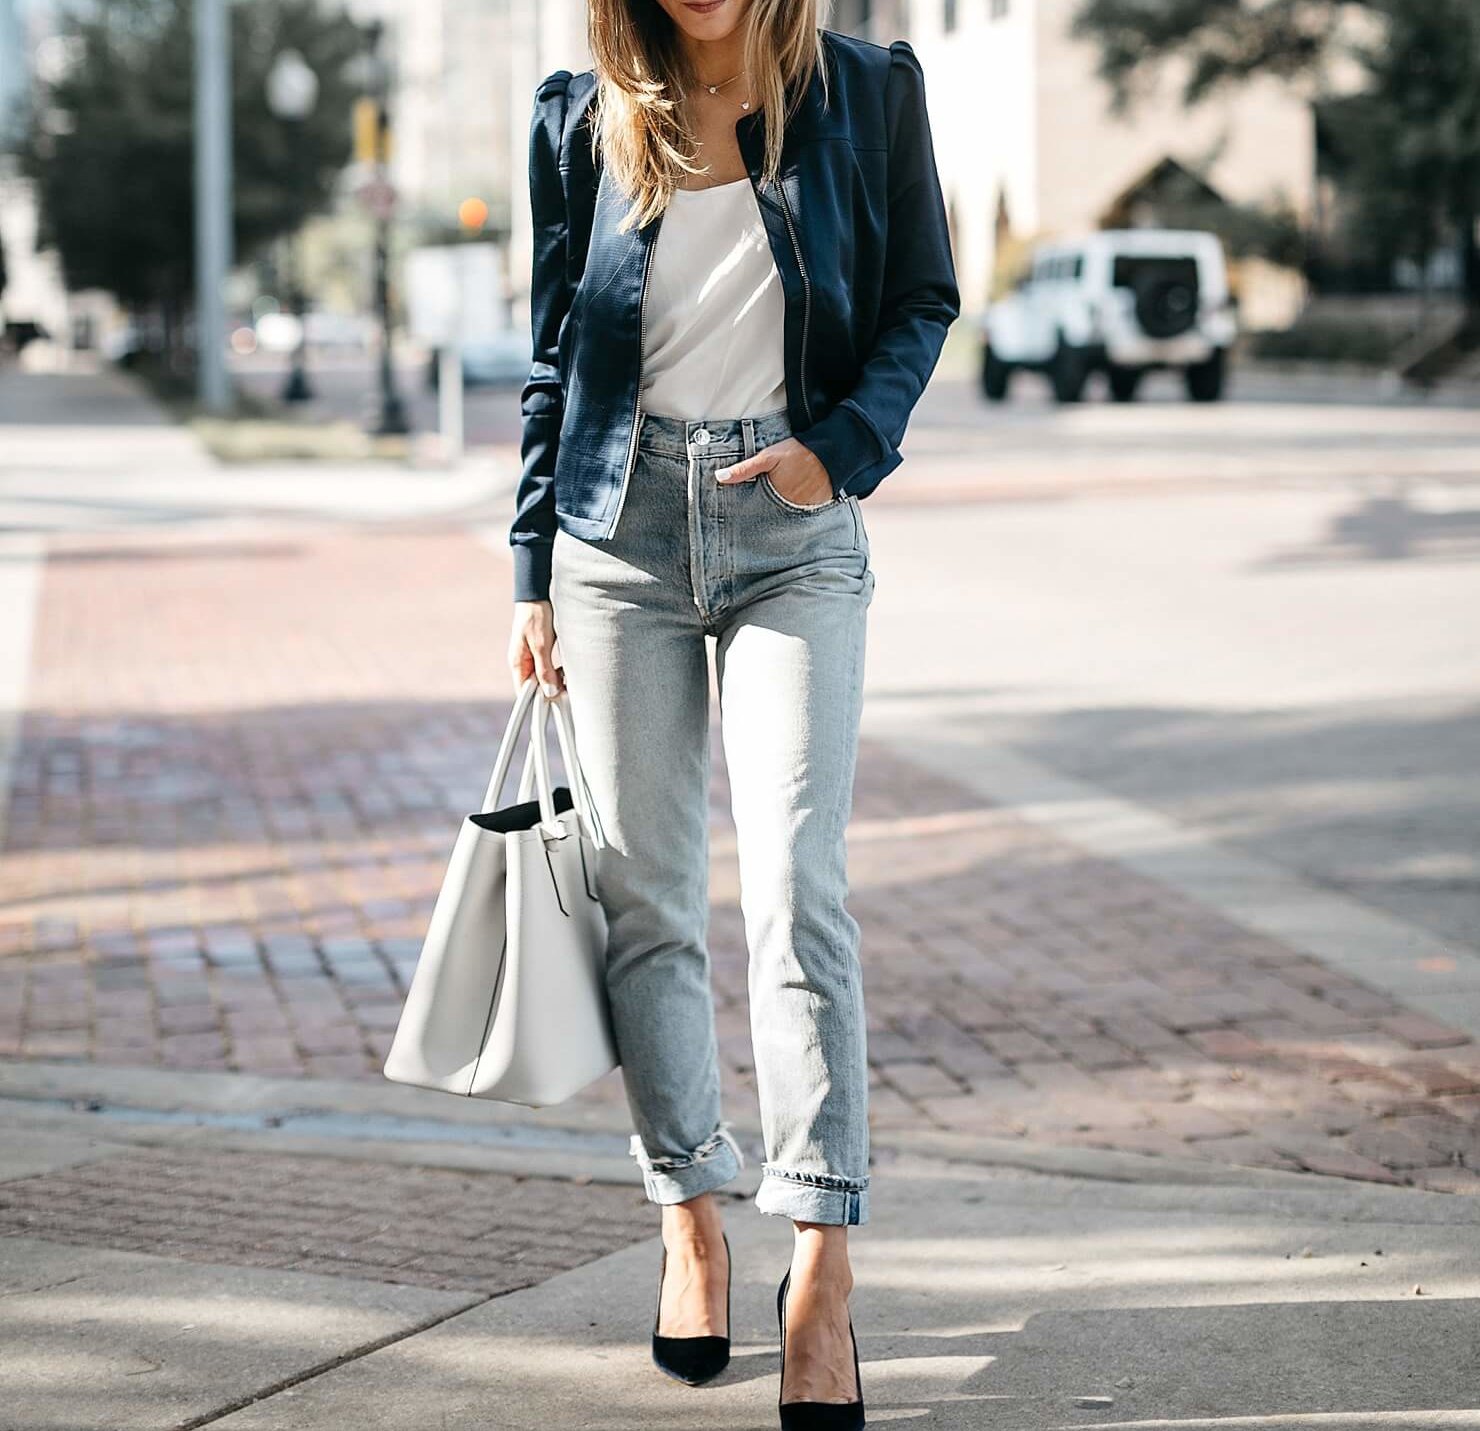 satin bomber, white t-shirt, light jeans, and low blue heel